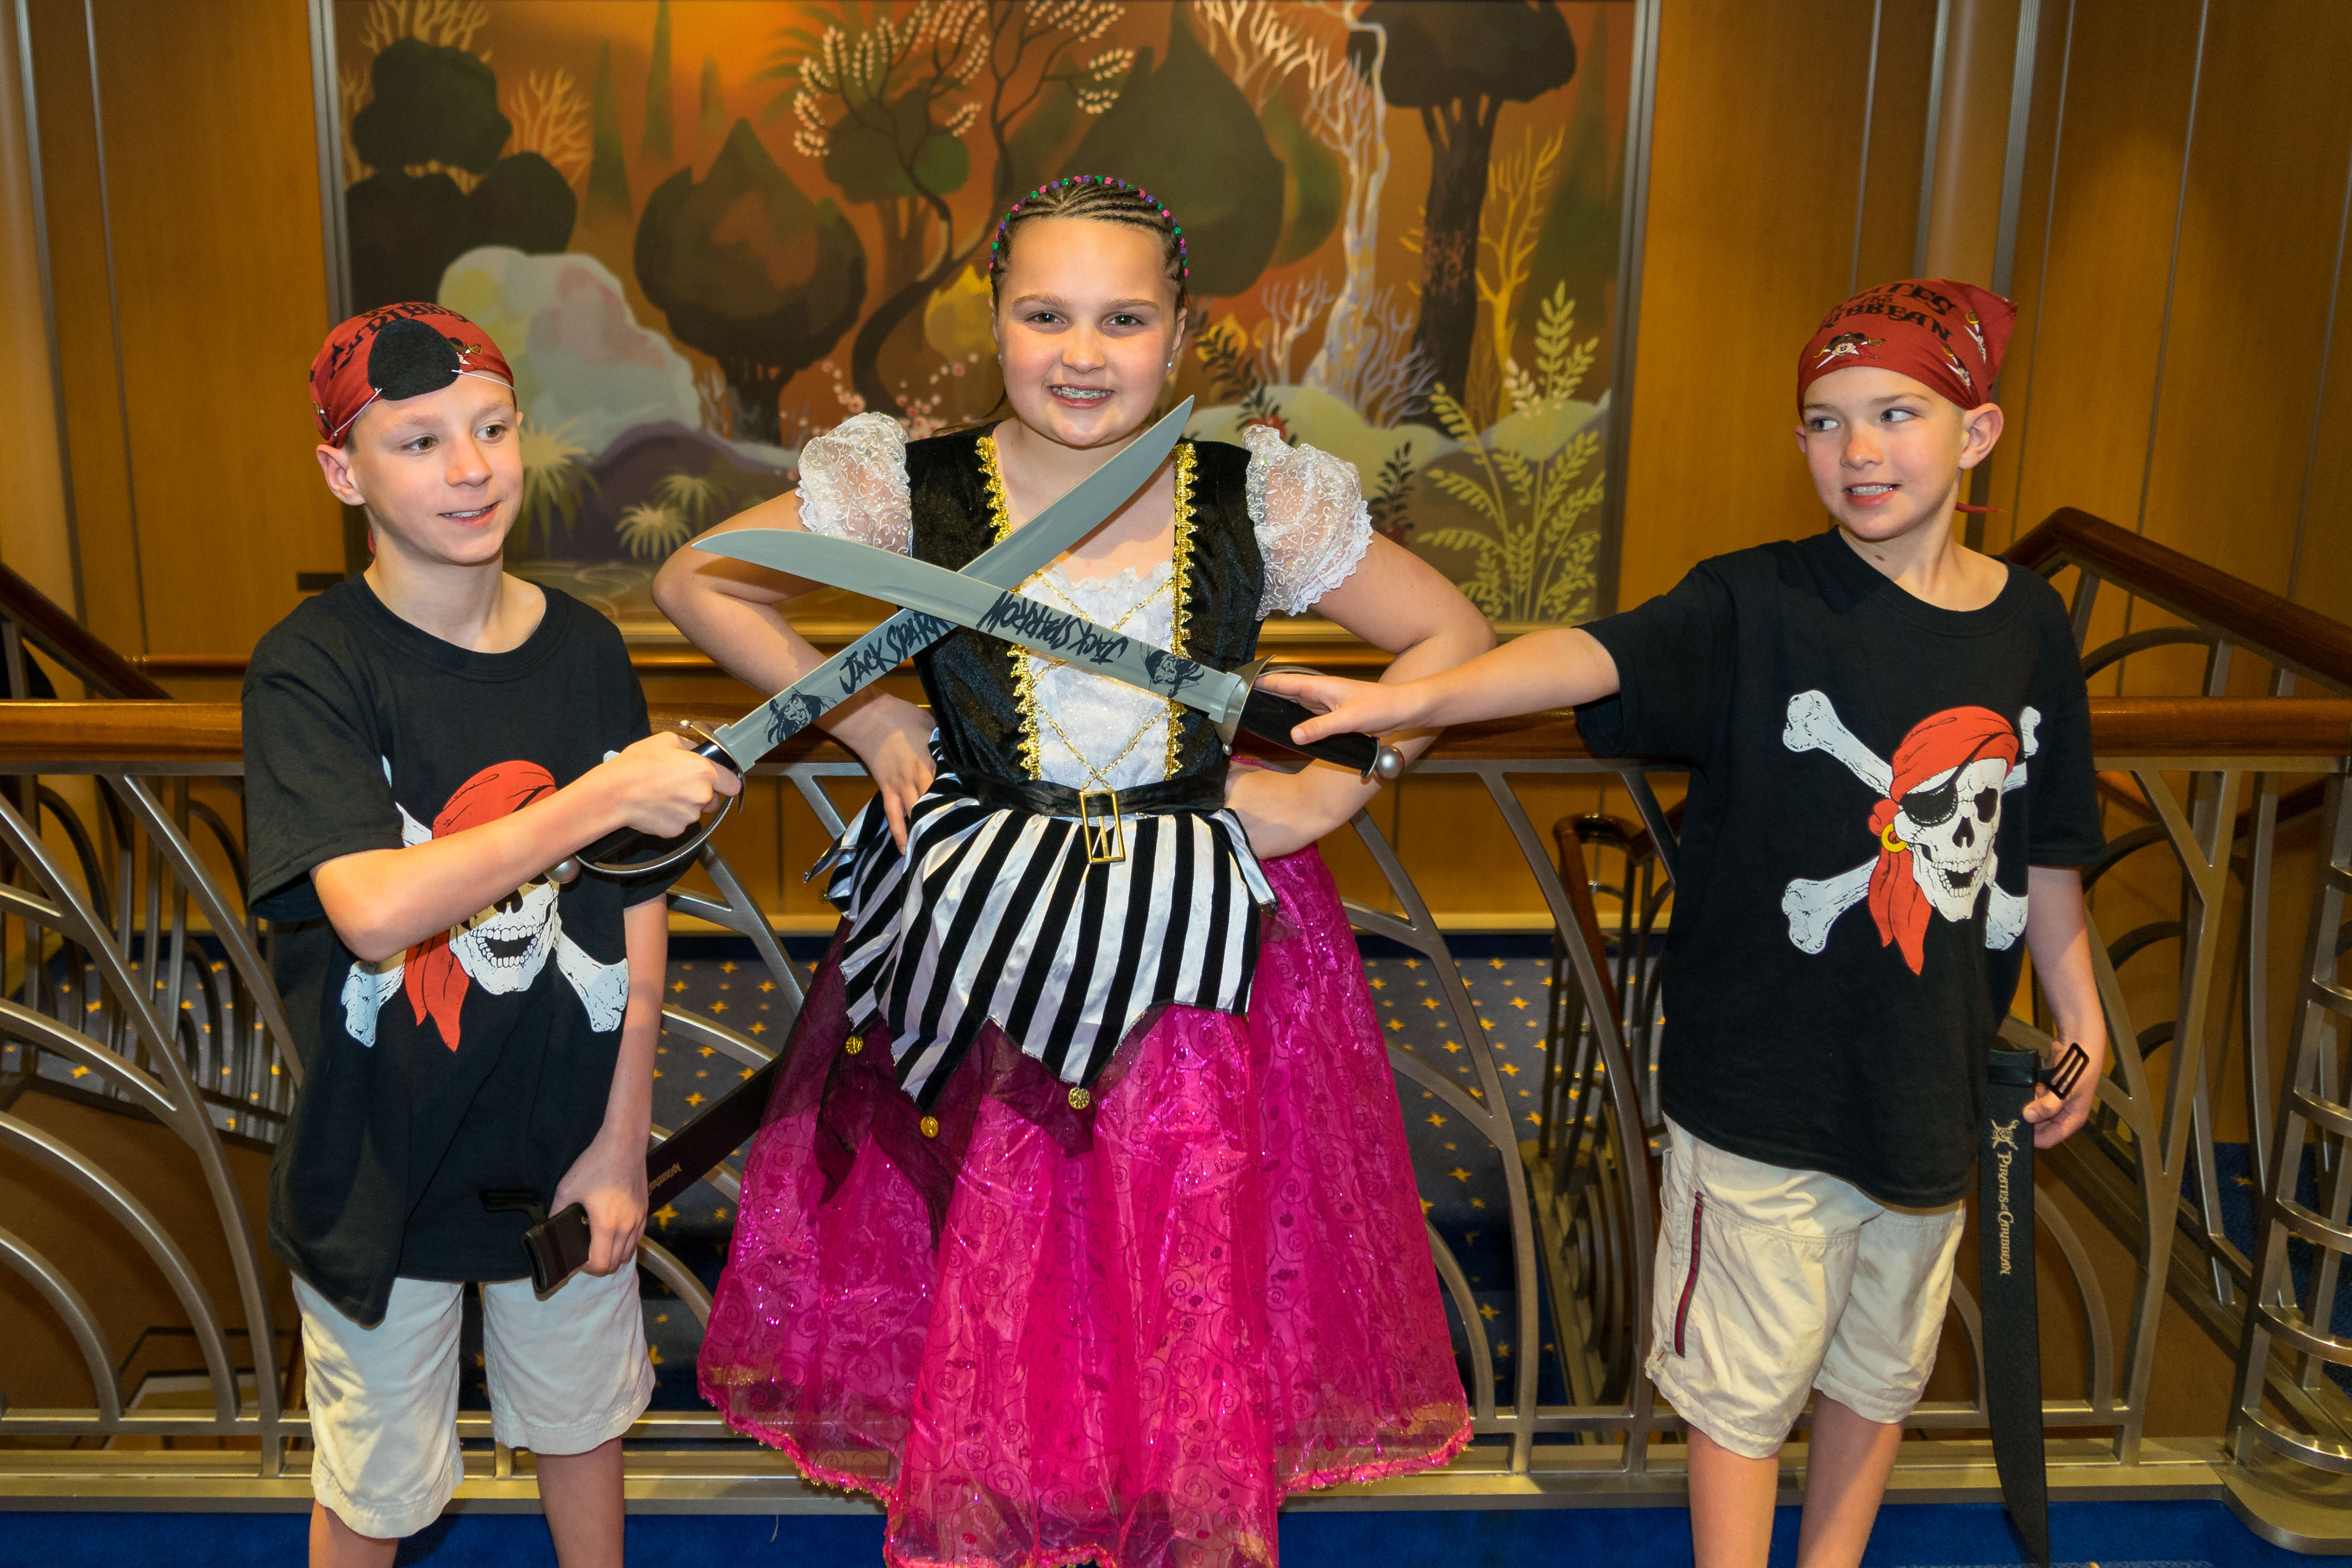 Pirate Night is worth the effort of thinking ahead. The kids will have a memorable time clashing swords with Jack Sparrow and watching fireworks. (Kevin Kaiser | Travel Beat Magazine)